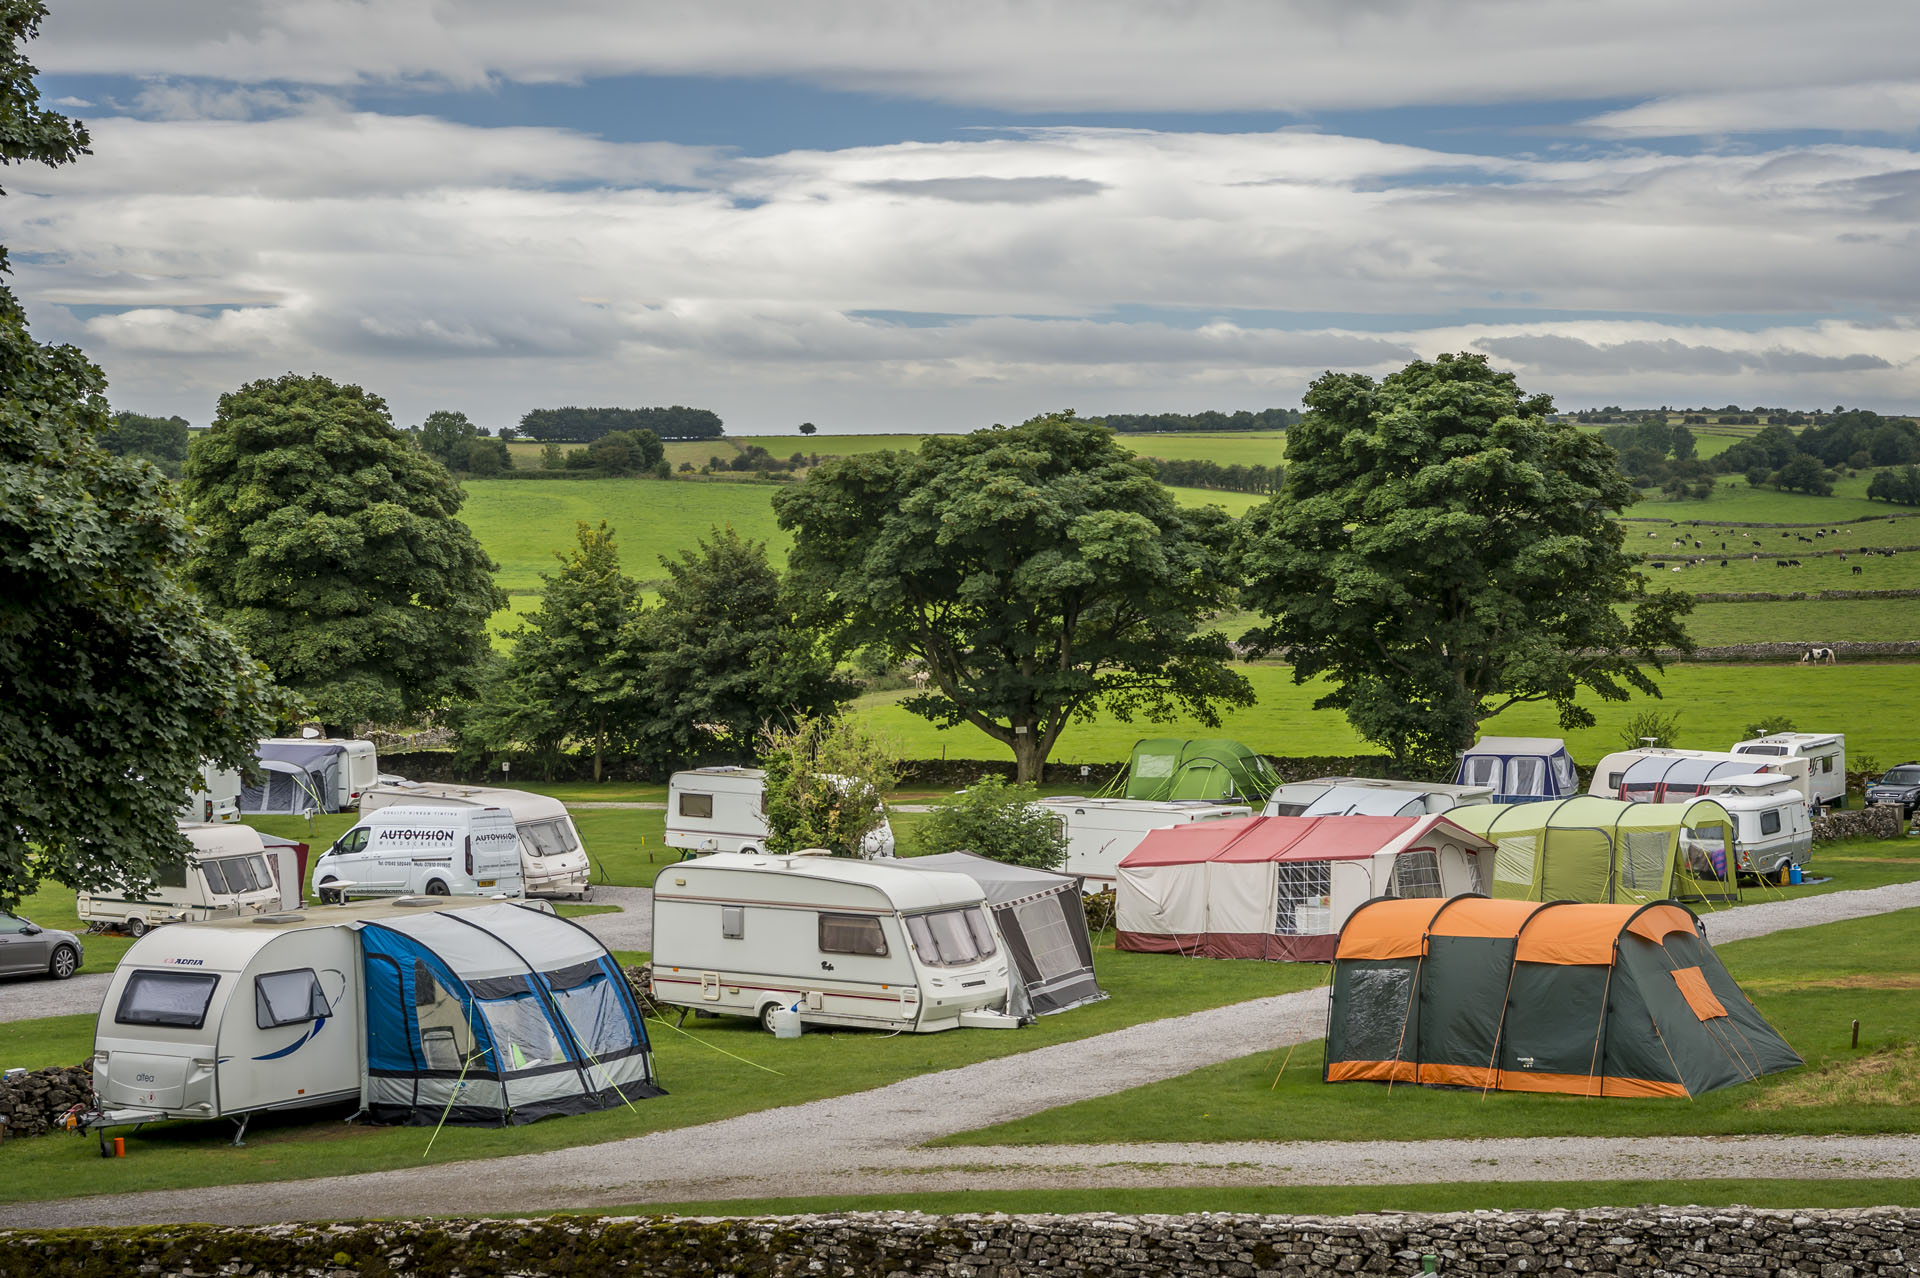 Cheddar Mendip Heights - Camping and Caravanning Club Site - The Camping  and Caravanning Club